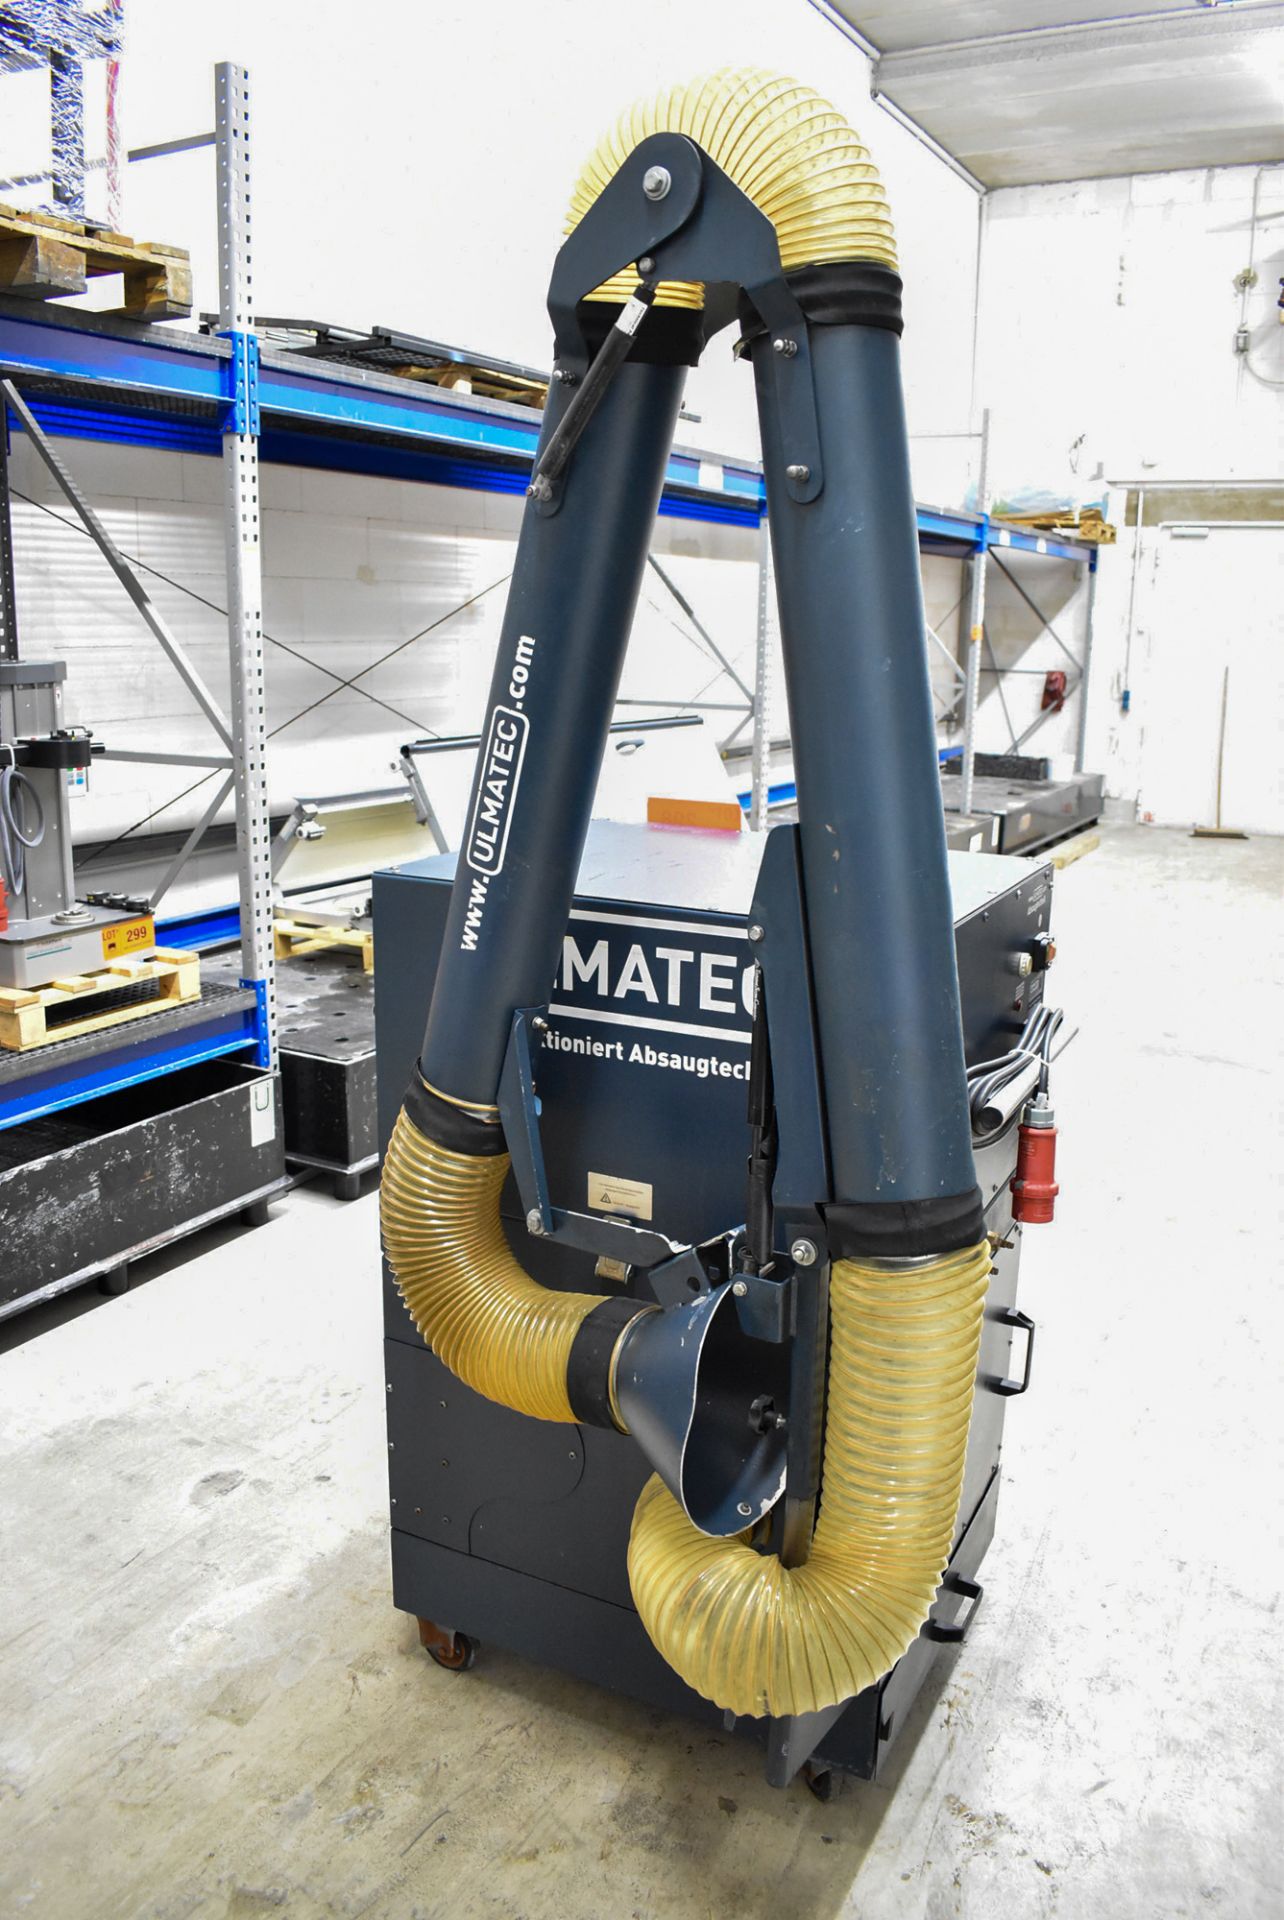 ULMATEC (2012) IRF 8-1-2 1.1KW PORTABLE WELDING FUME EXTRACTOR, S/N N/A (BAU 7) [Removal Fee = € - Image 3 of 3